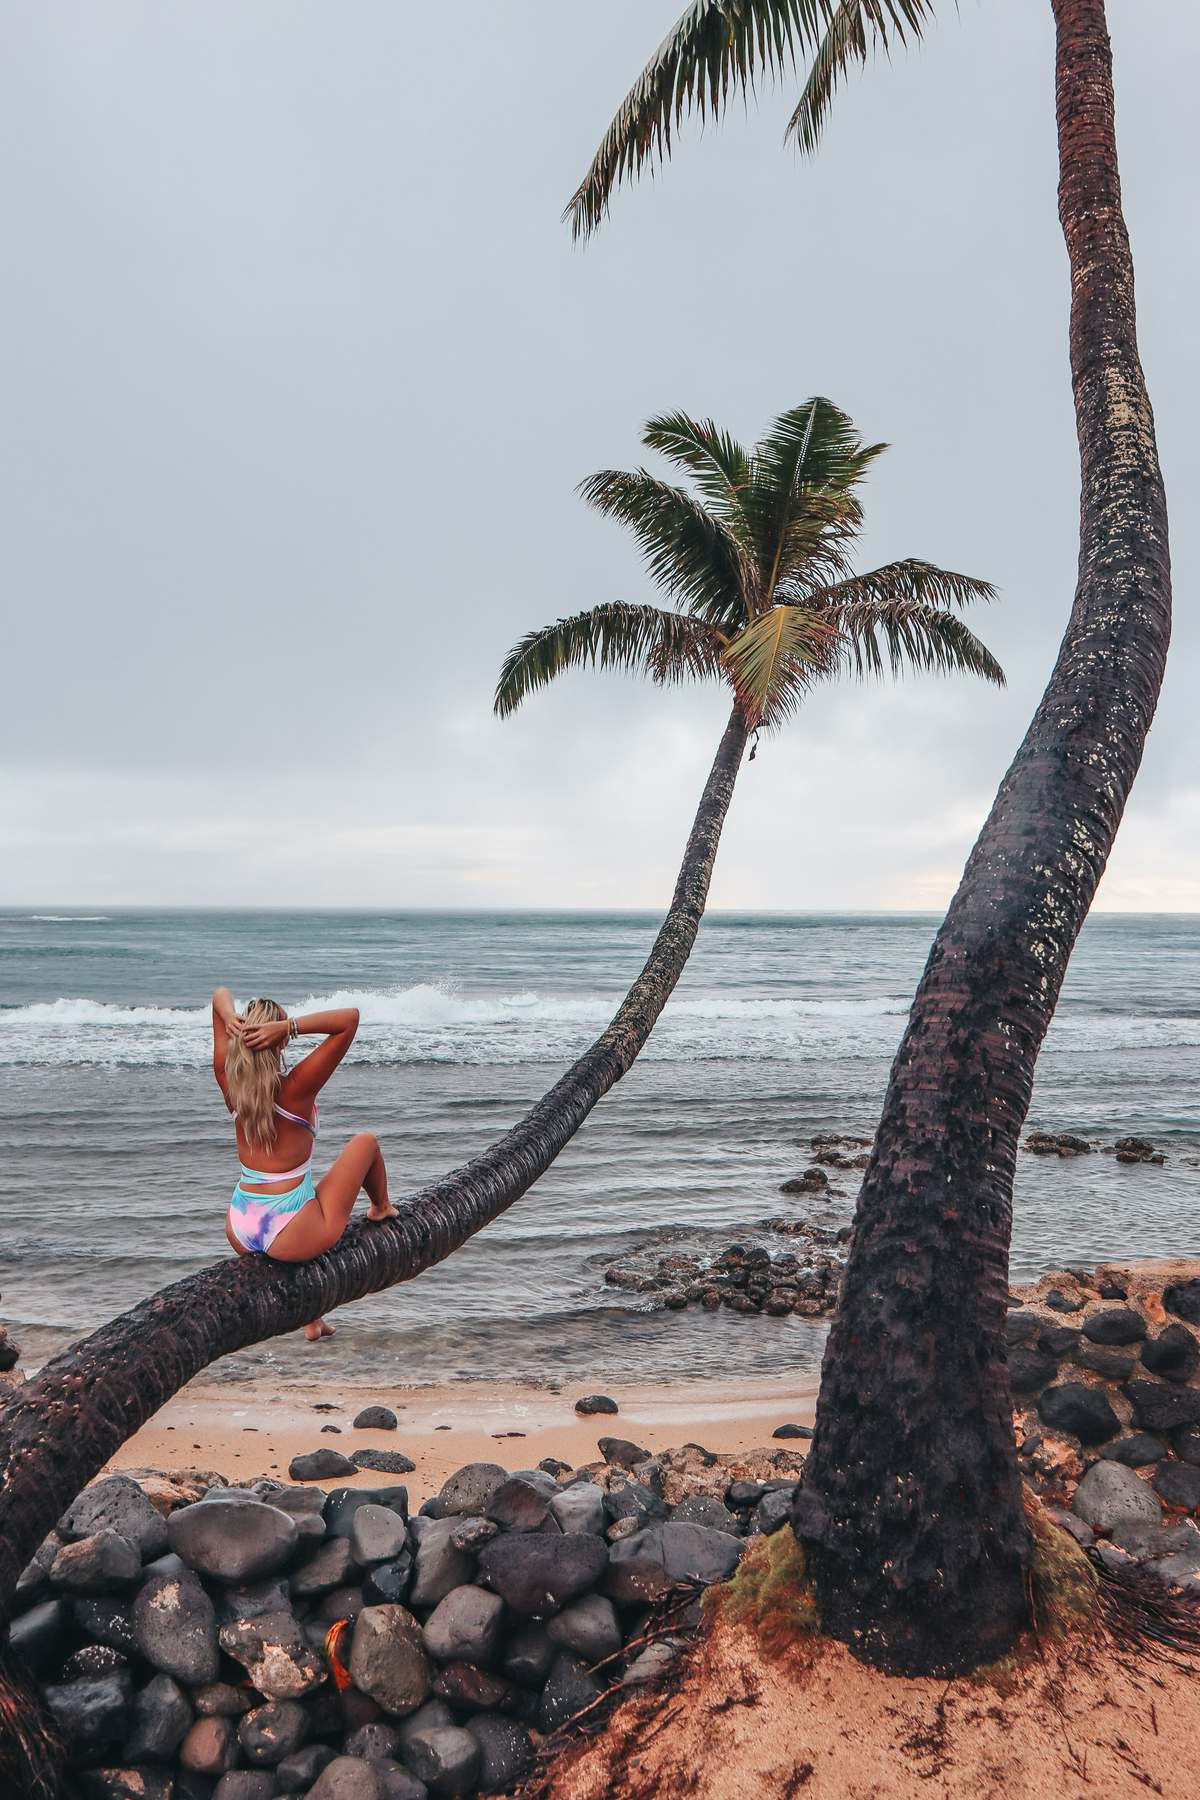 Posing on a curved palm tree on a gloomy day at a beach on Oahu